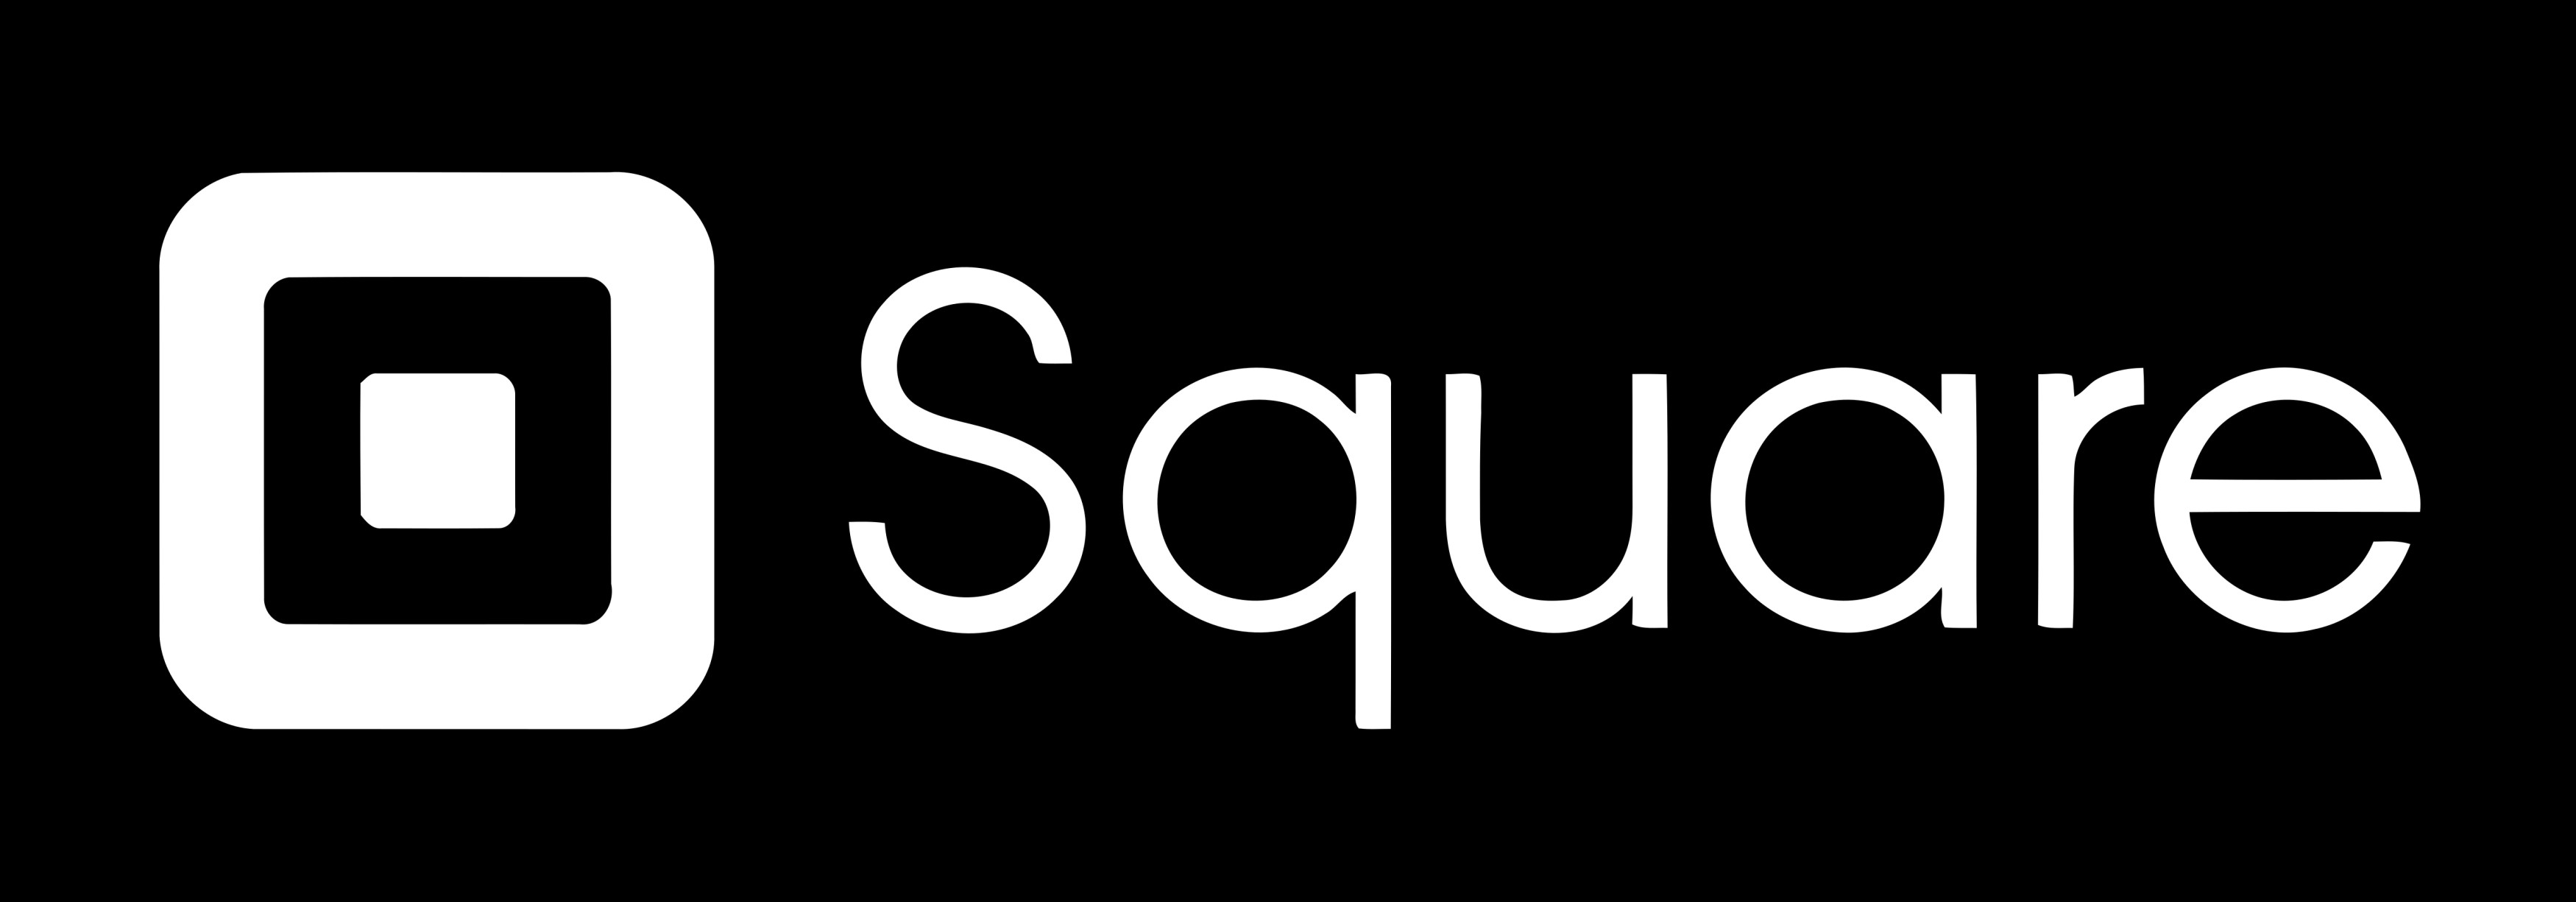 Square Inc - An American Company providing Digital Payment Services.